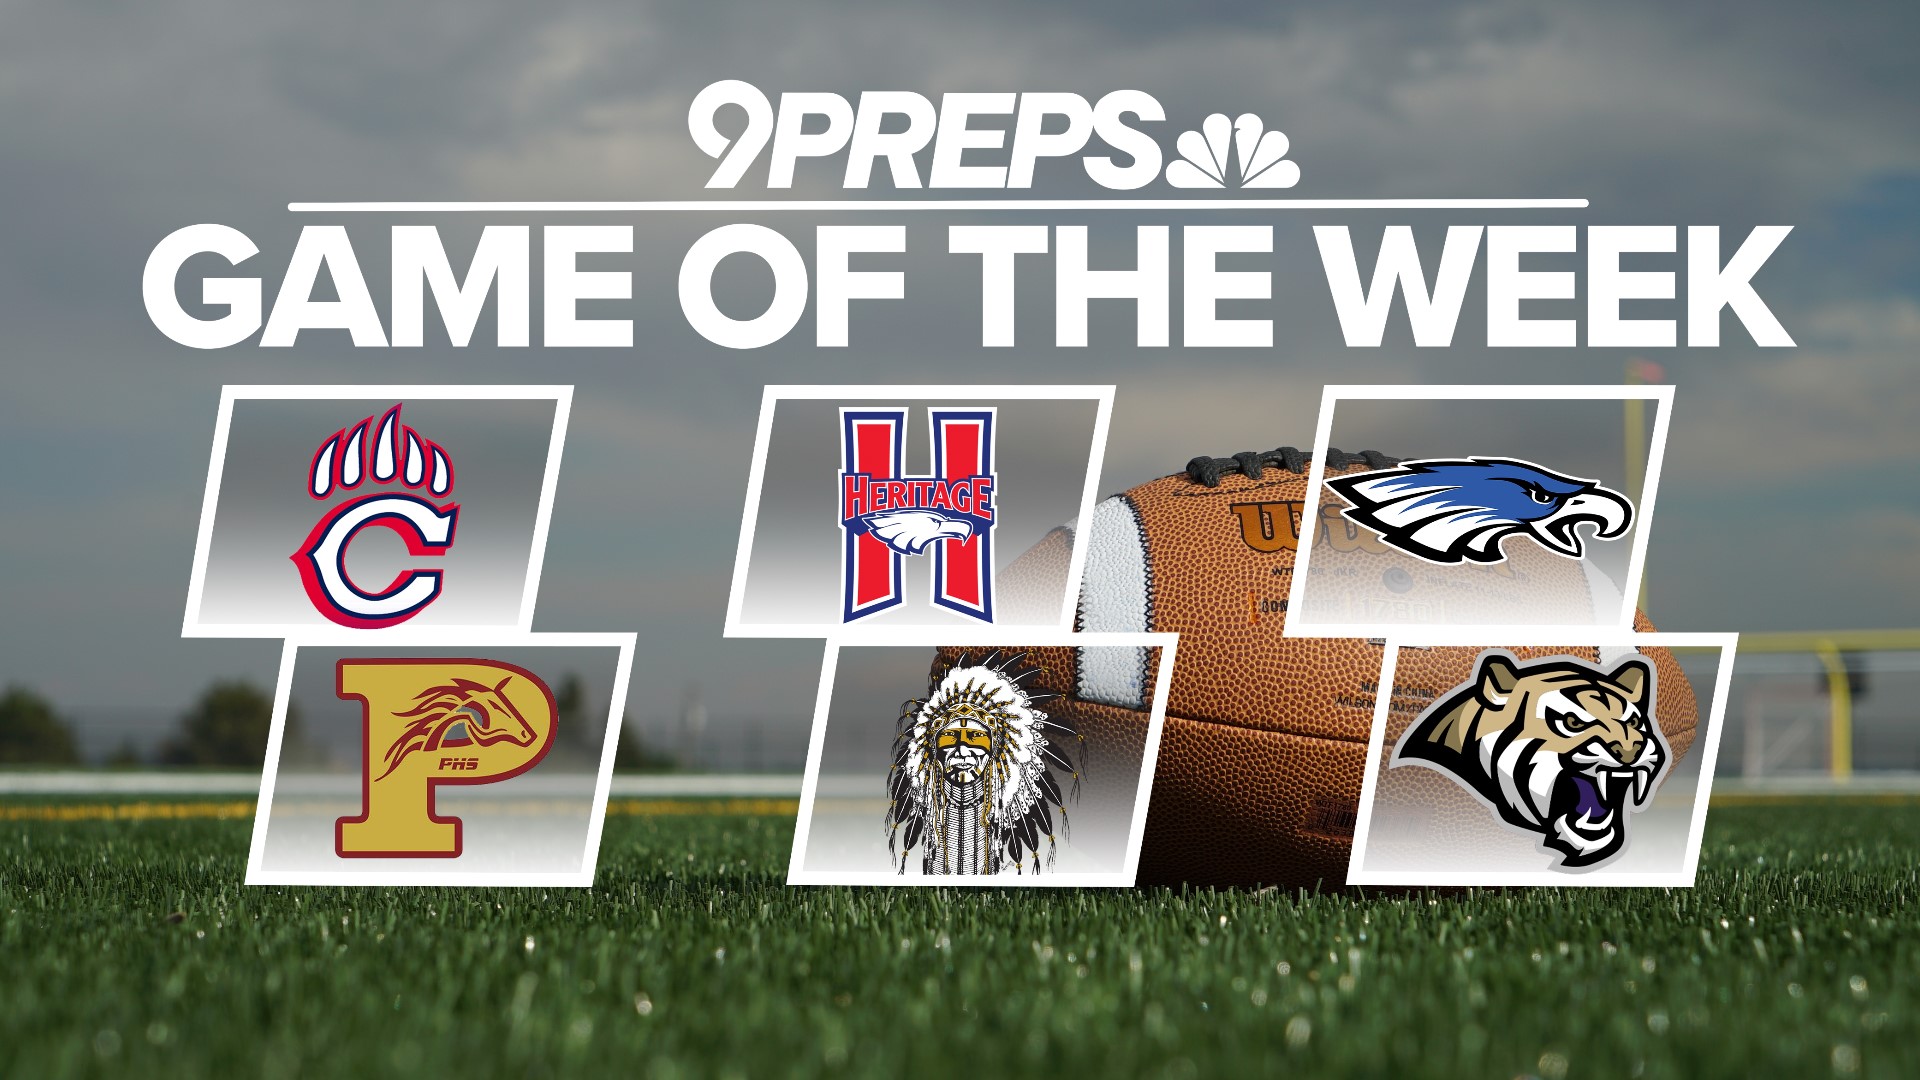 The 9Preps Game of the Week rolls on! Vote to determine which high school football game we showcase on Friday, Sept. 1.